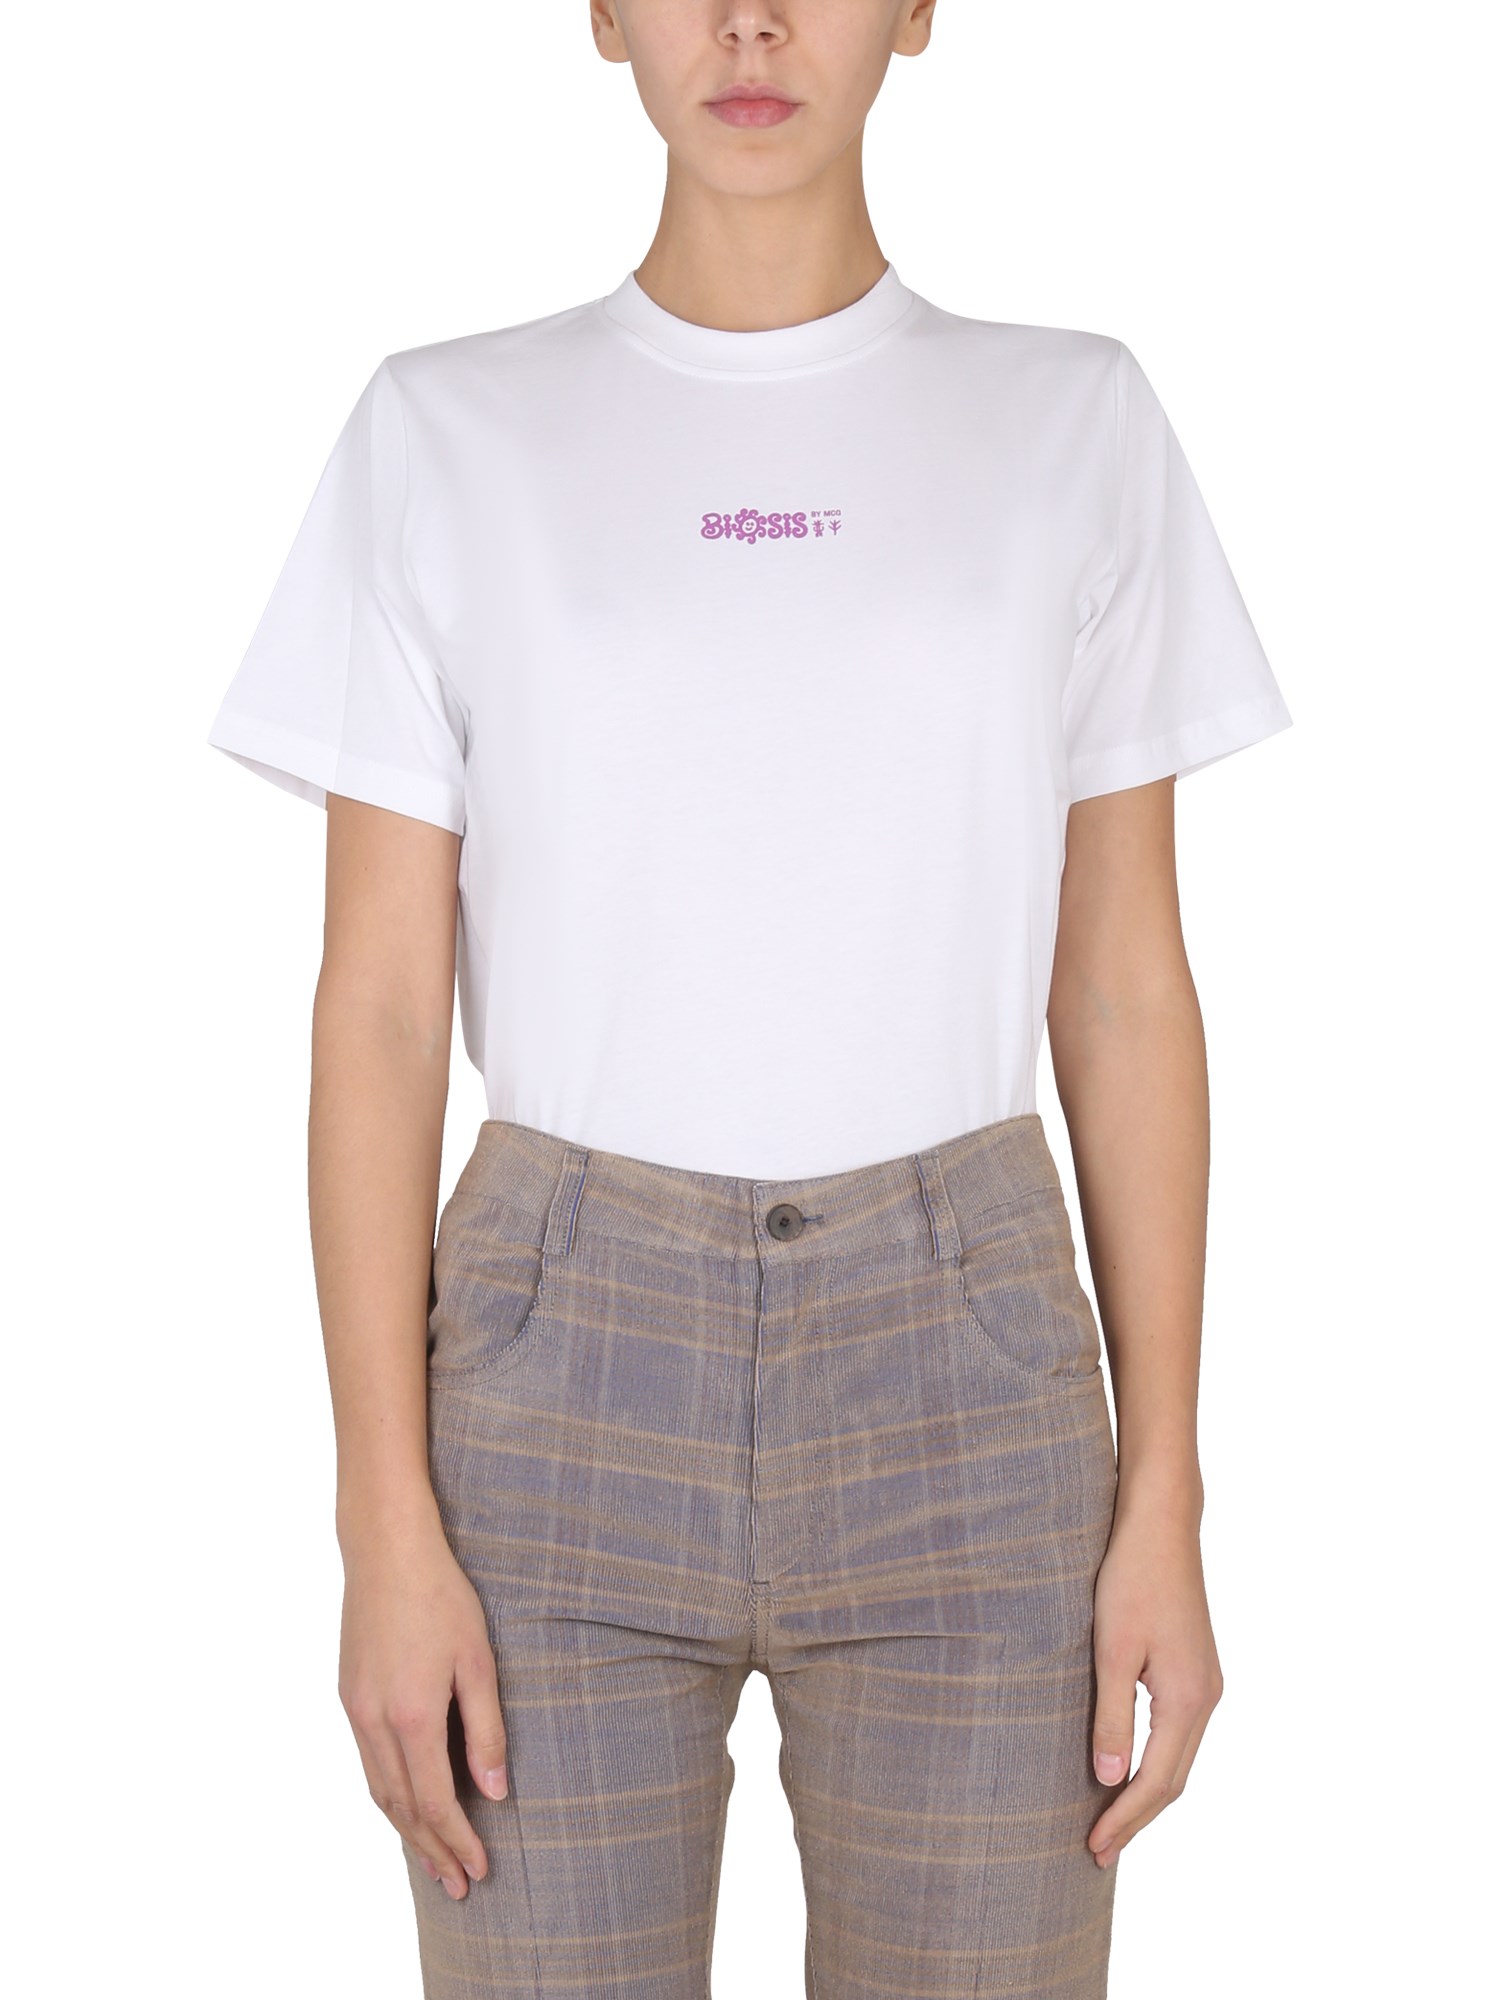 mcq t-shirt with logo